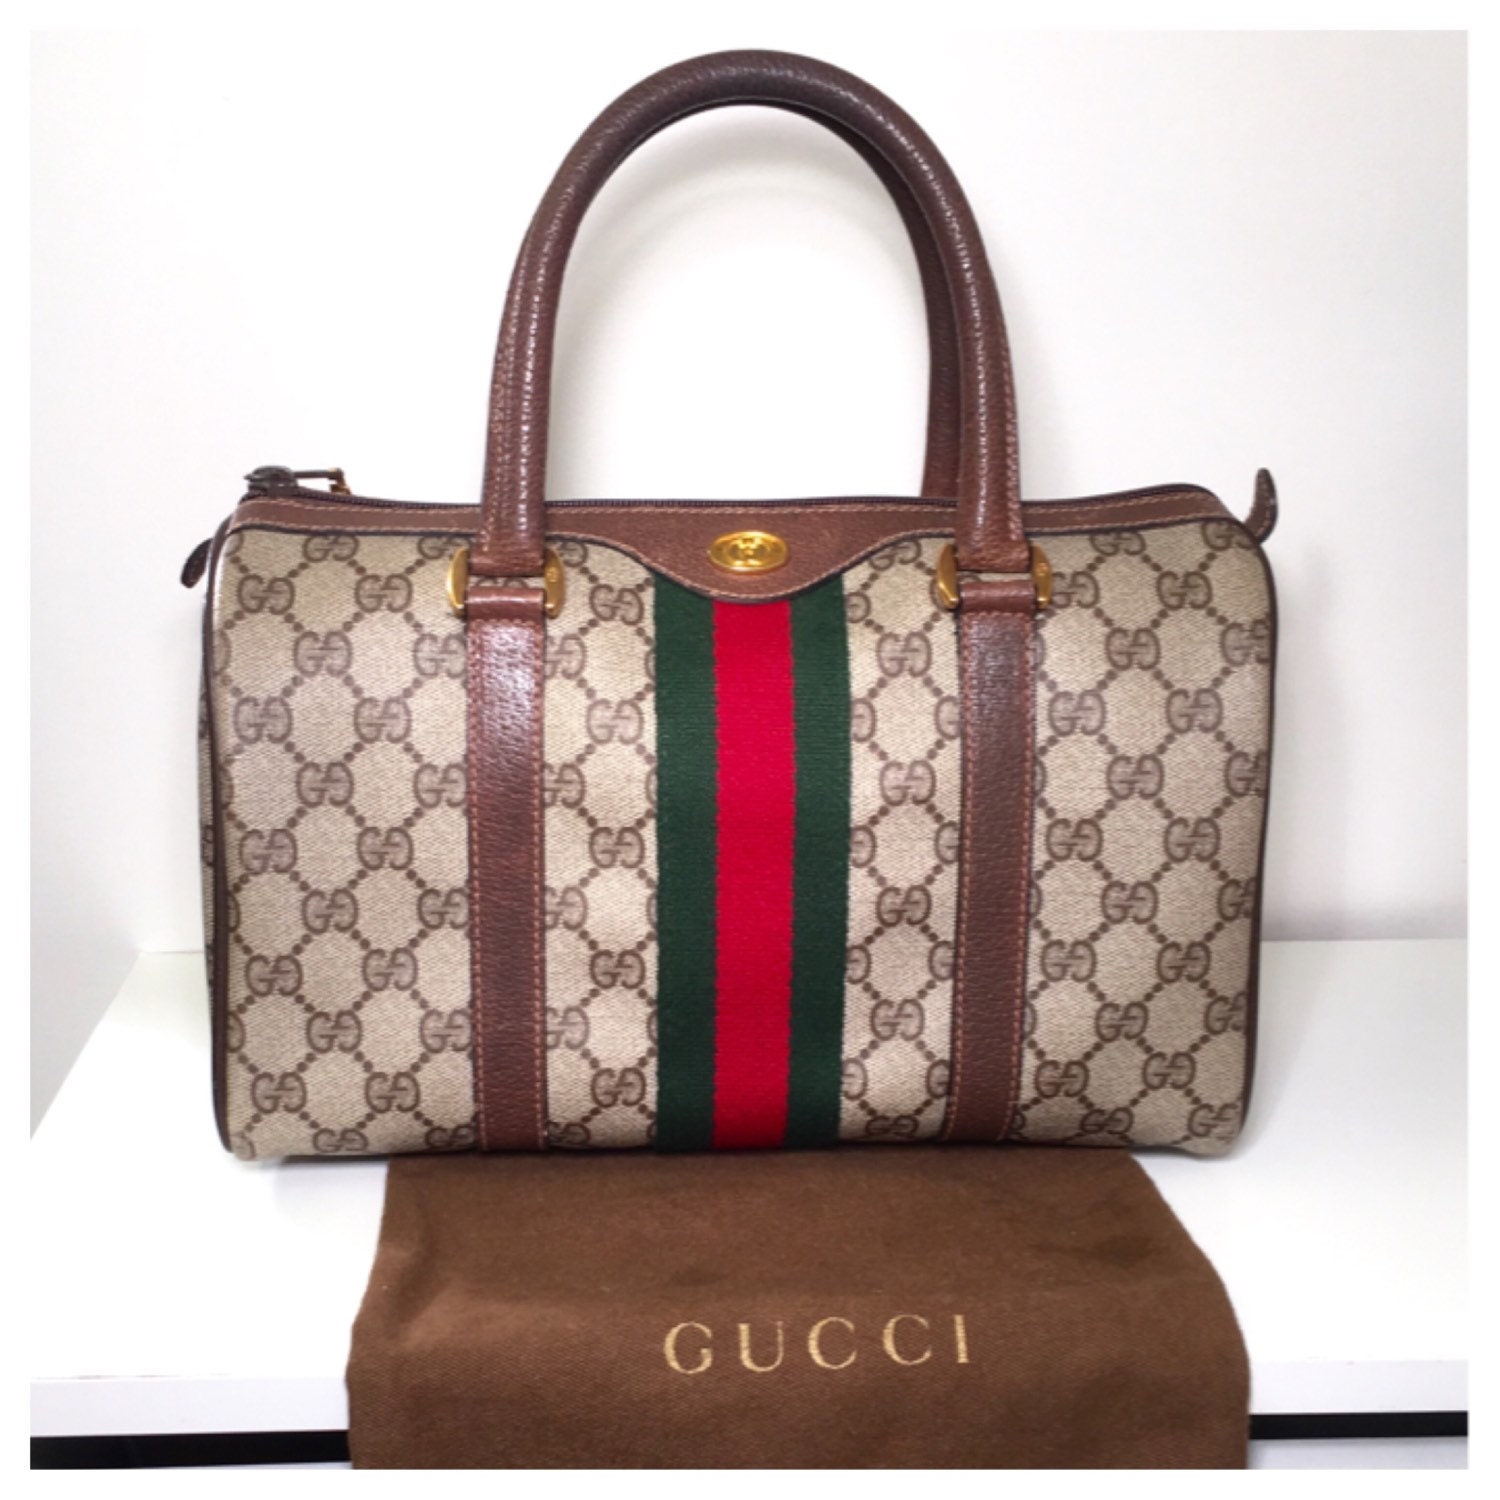 Vintage Gucci Bags 1990s | Confederated Tribes of the Umatilla Indian Reservation